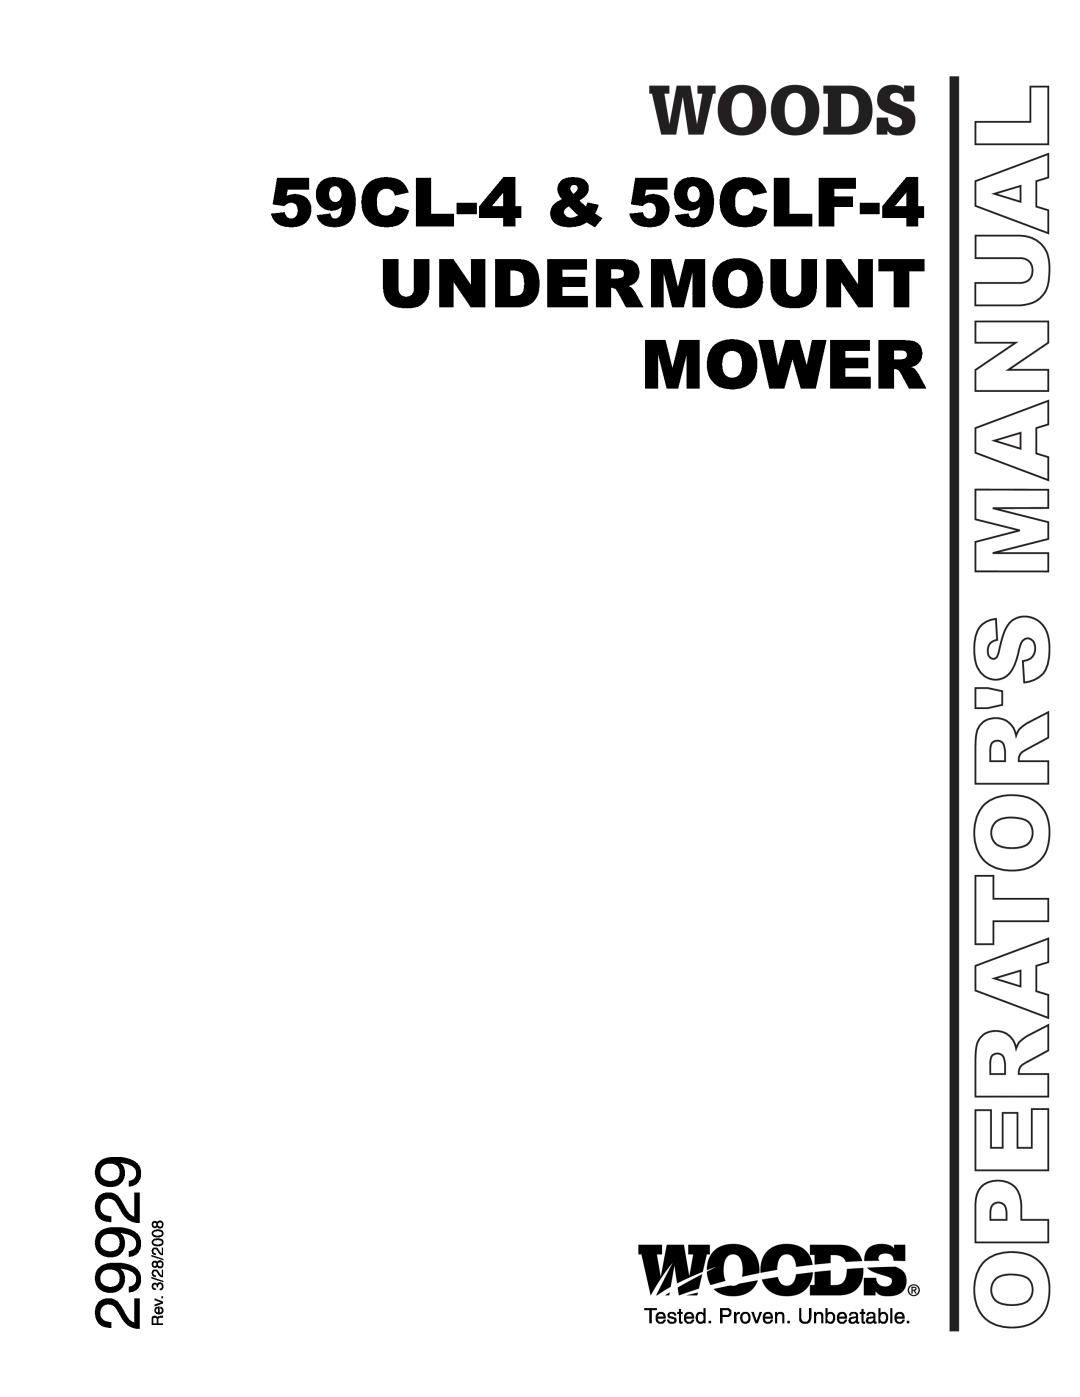 Woods Equipment manual Tested. Proven. Unbeatable, 59CL-4 & 59CLF-4, Undermount Mower, 29929, Operators Manual 